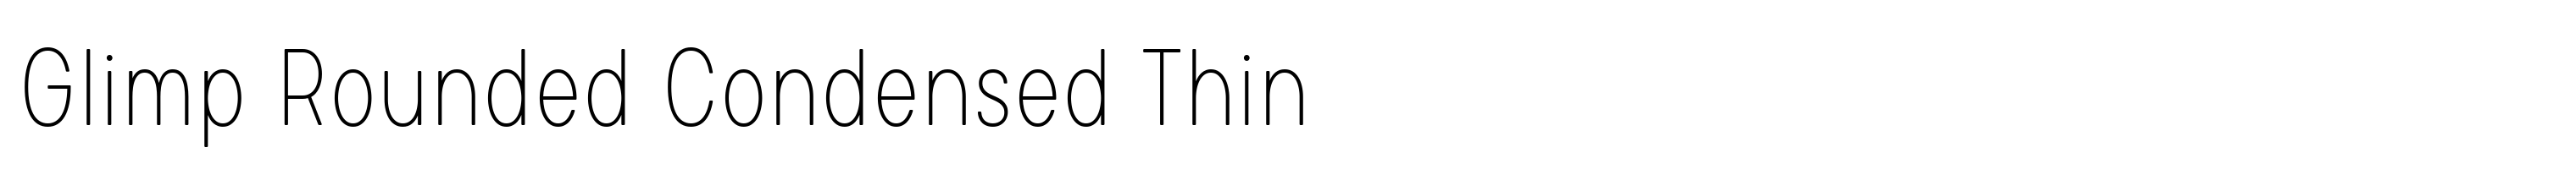 Glimp Rounded Condensed Thin